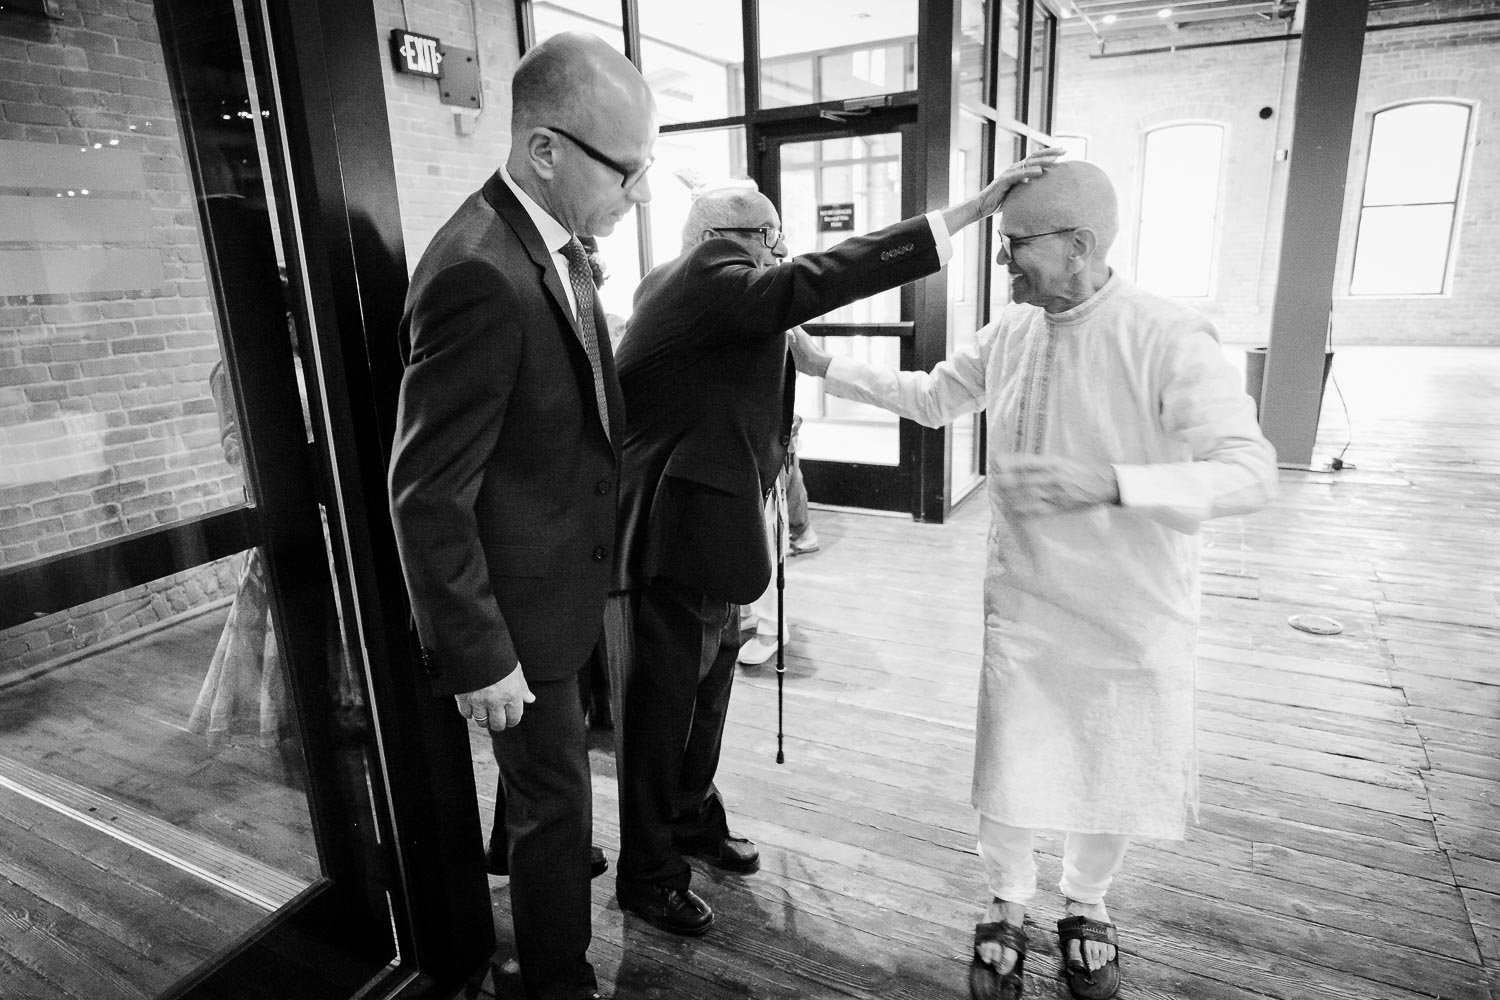 A humorous moment as a friend of the father of the bride pats his head